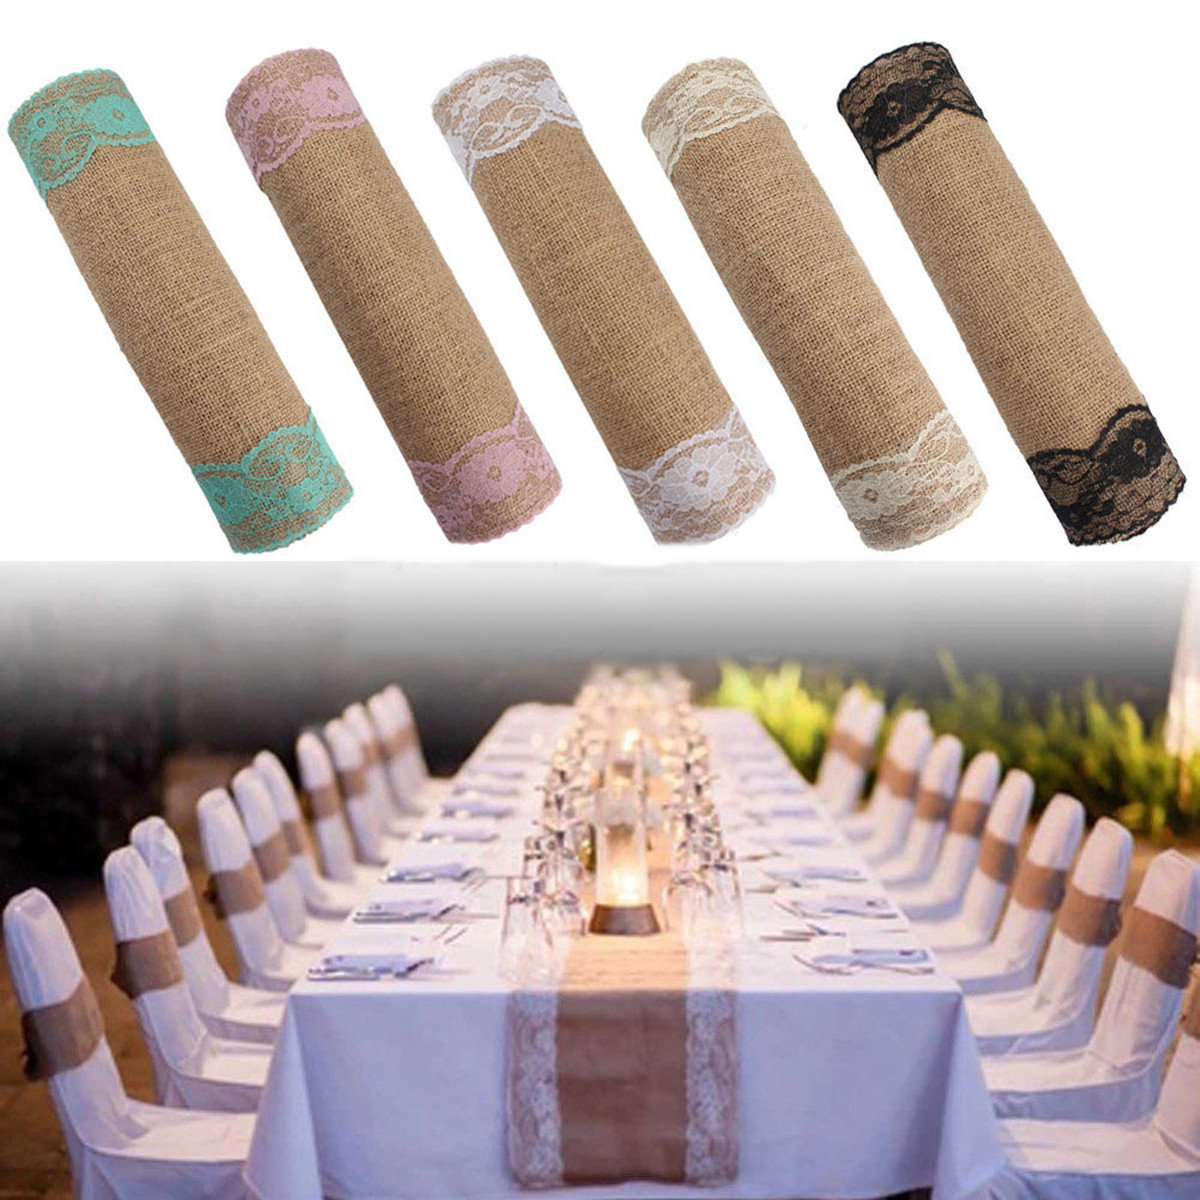 

5 Colors Jute Rustic Burlap Lace Table Runner Wedding Party Banquet Decoration, Green pink iron grey white black